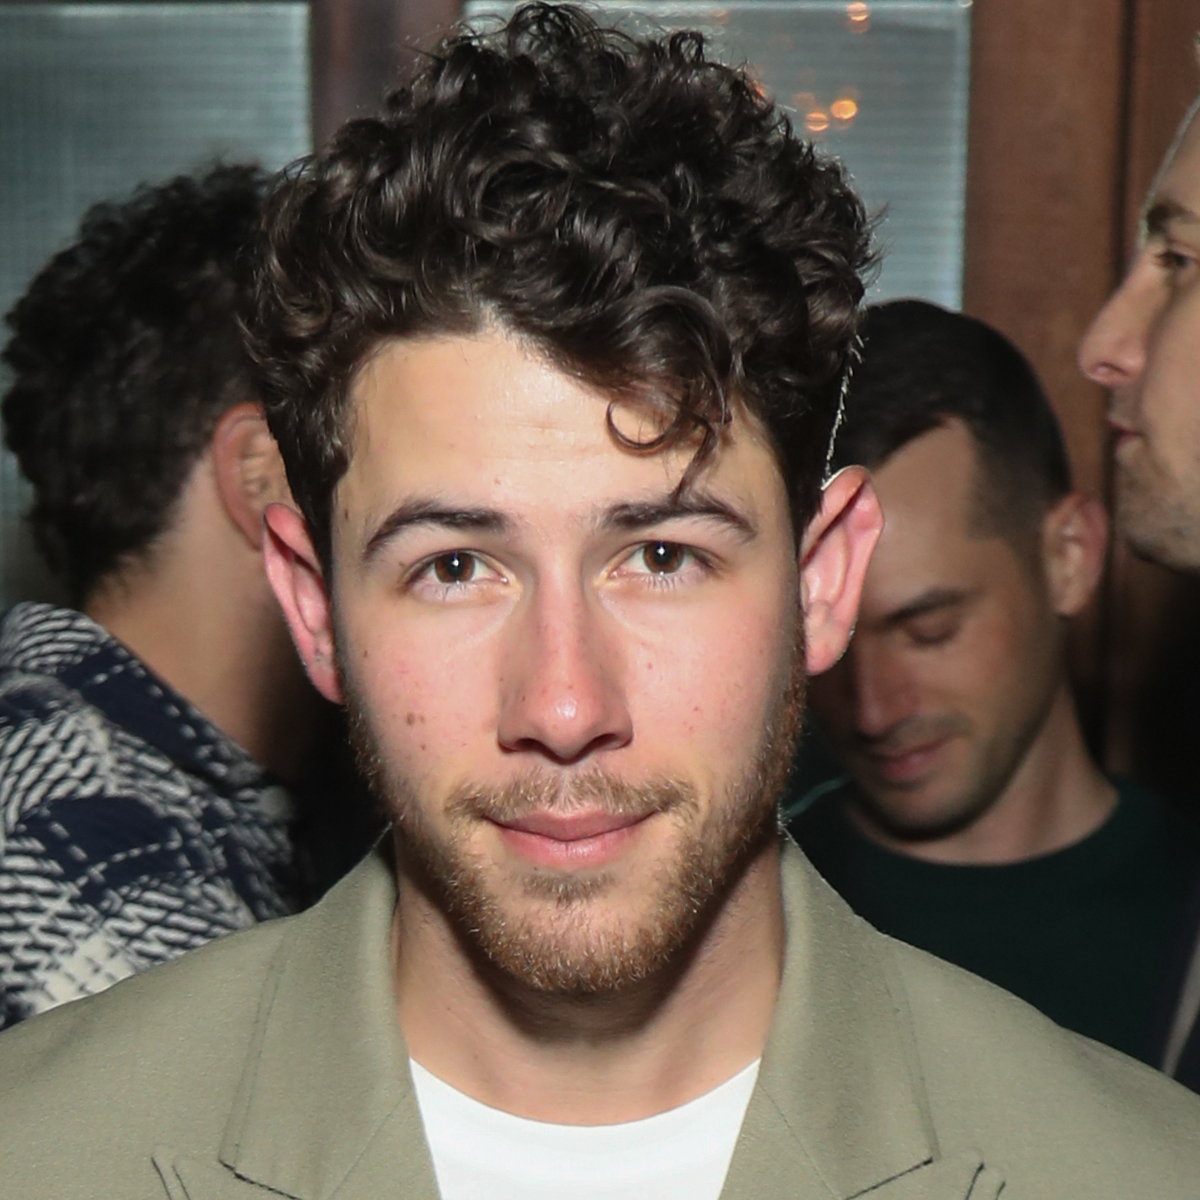 Nick Jonas Pauses For Moment and Walks Away After Bra Gets Thrown